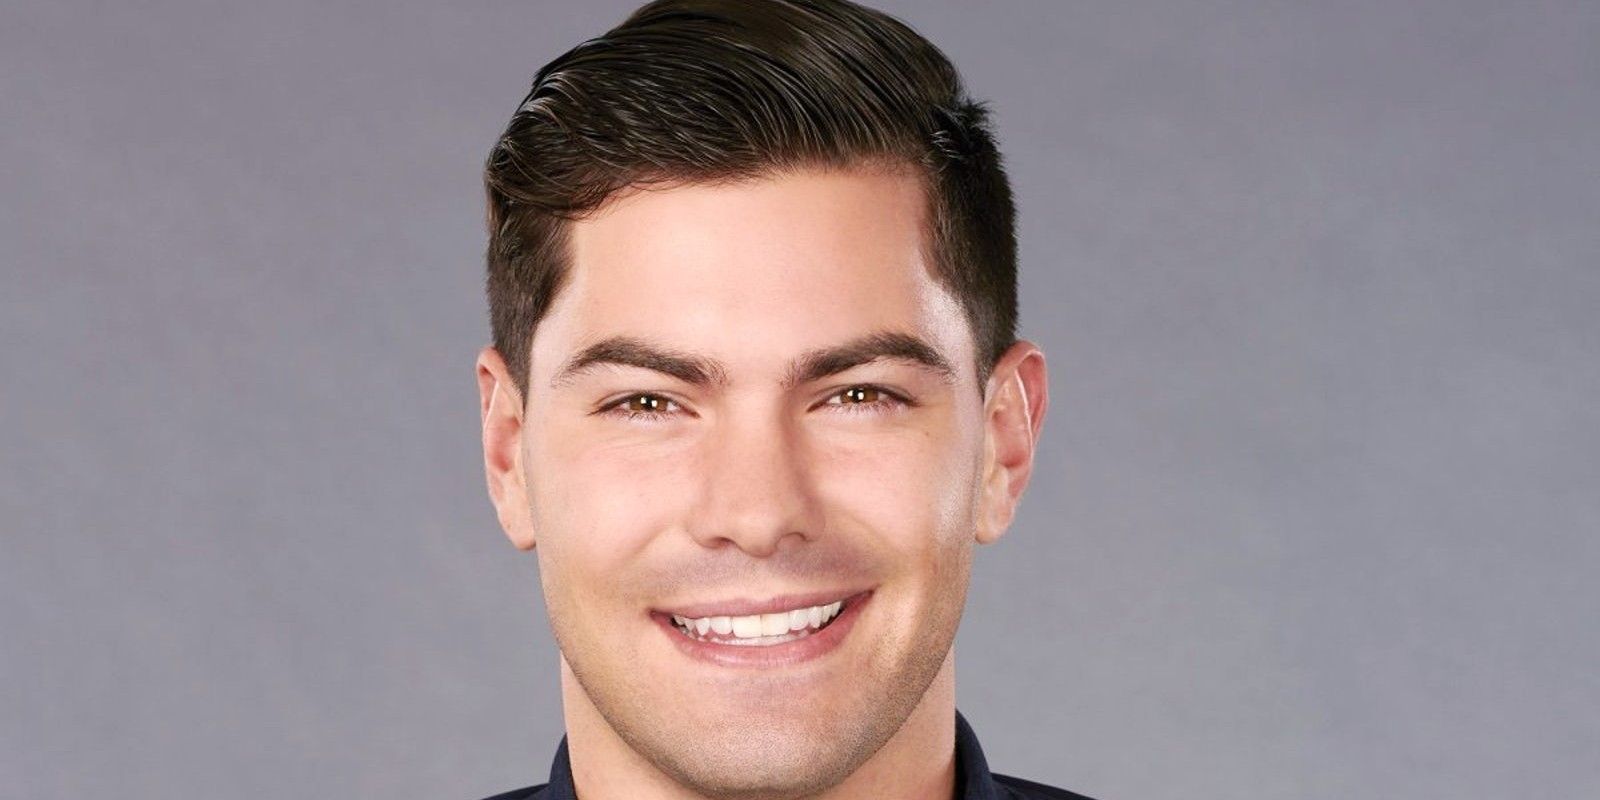 Bachelor in Paradise's Dylan tells Hannah he's falling in love